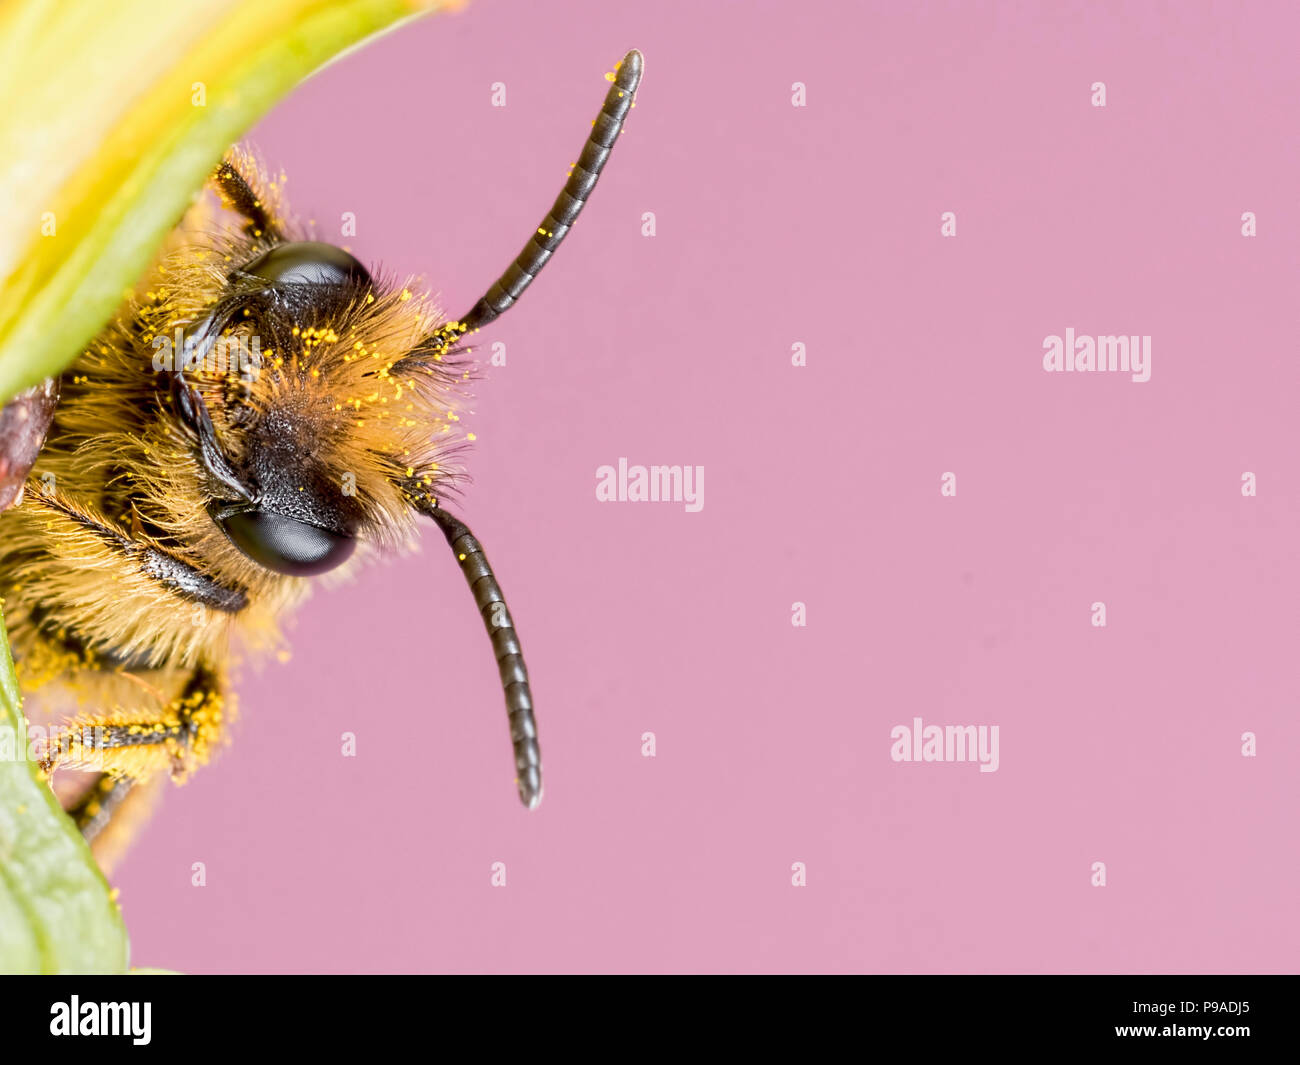 Solitary Bee Close Up with pink background Stock Photo